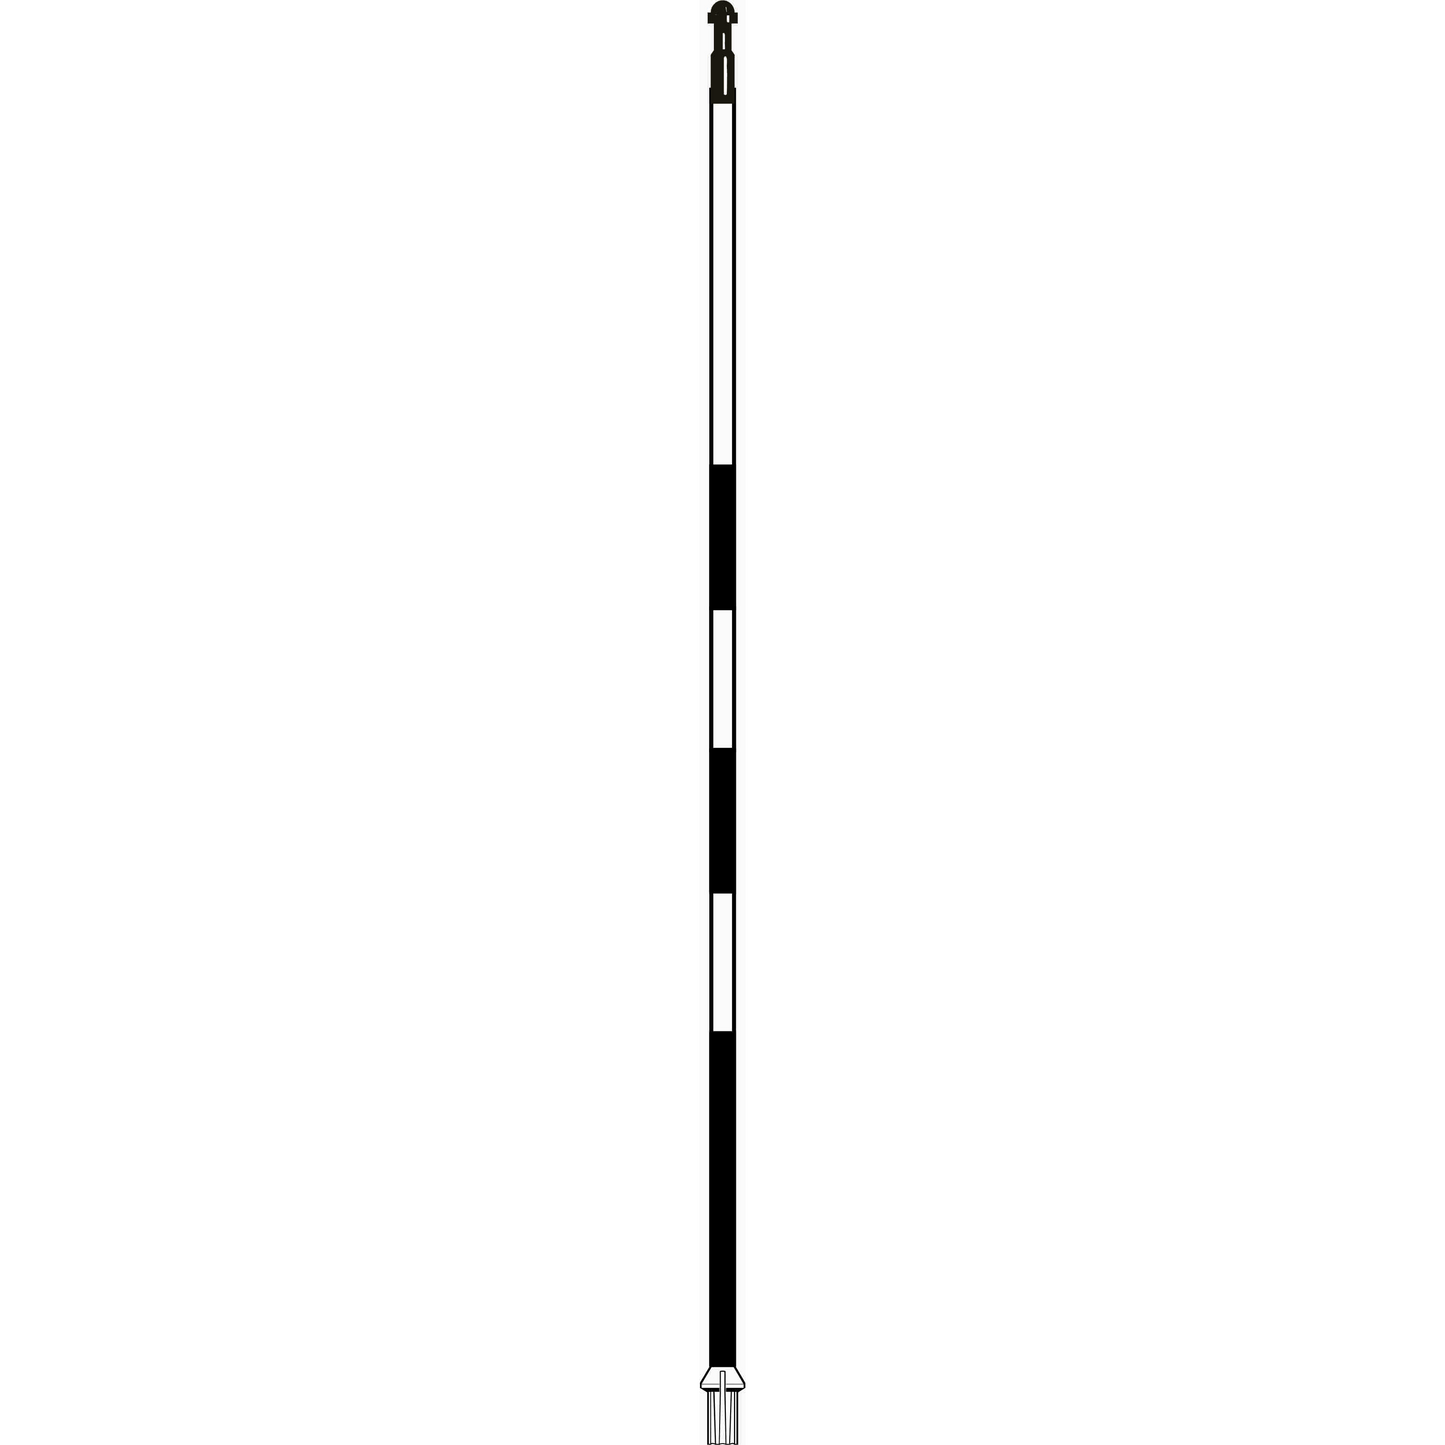 Flagstick 7.5' whitewith 3 black stripes